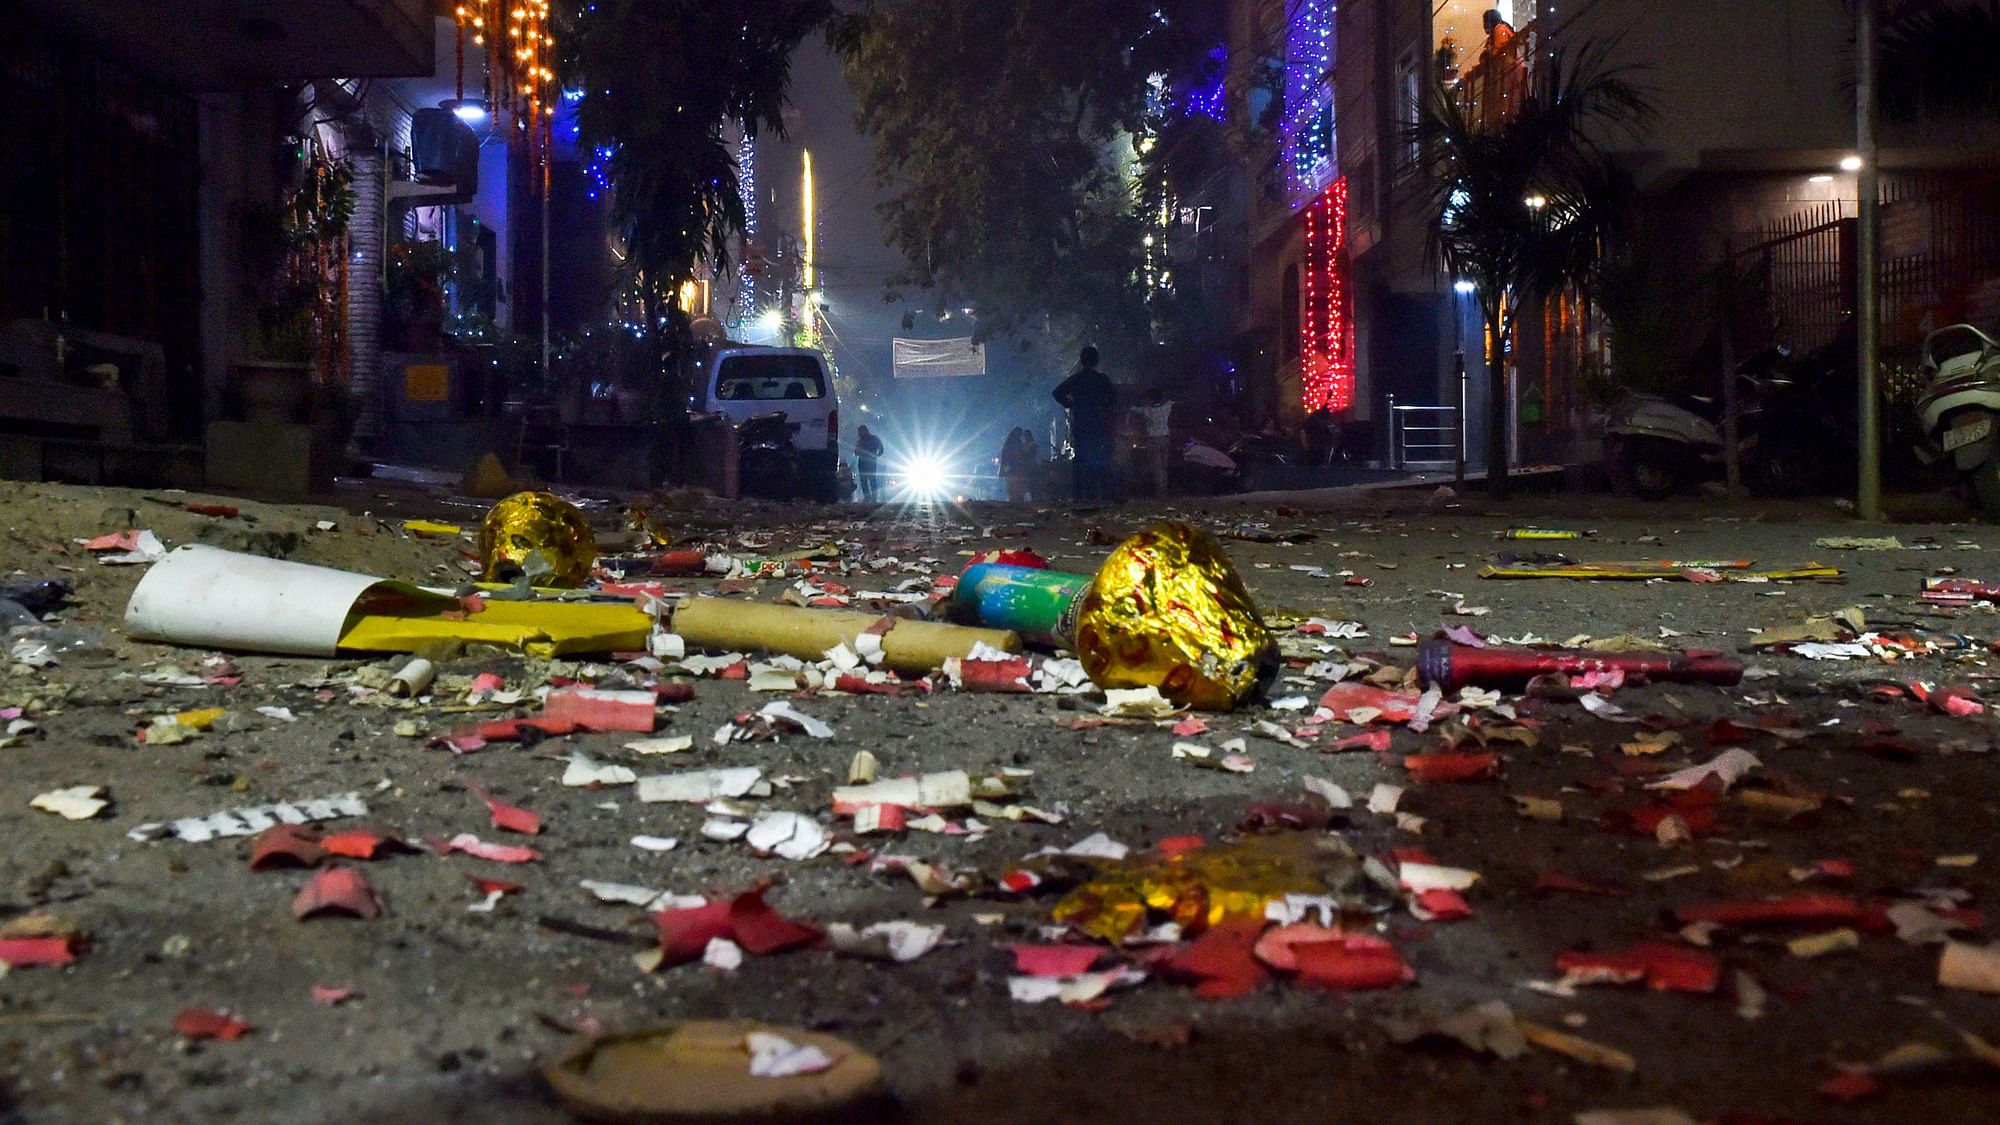 A view of a street littered with firecracker waste during Diwali celebrations in Delhi on 27 October.